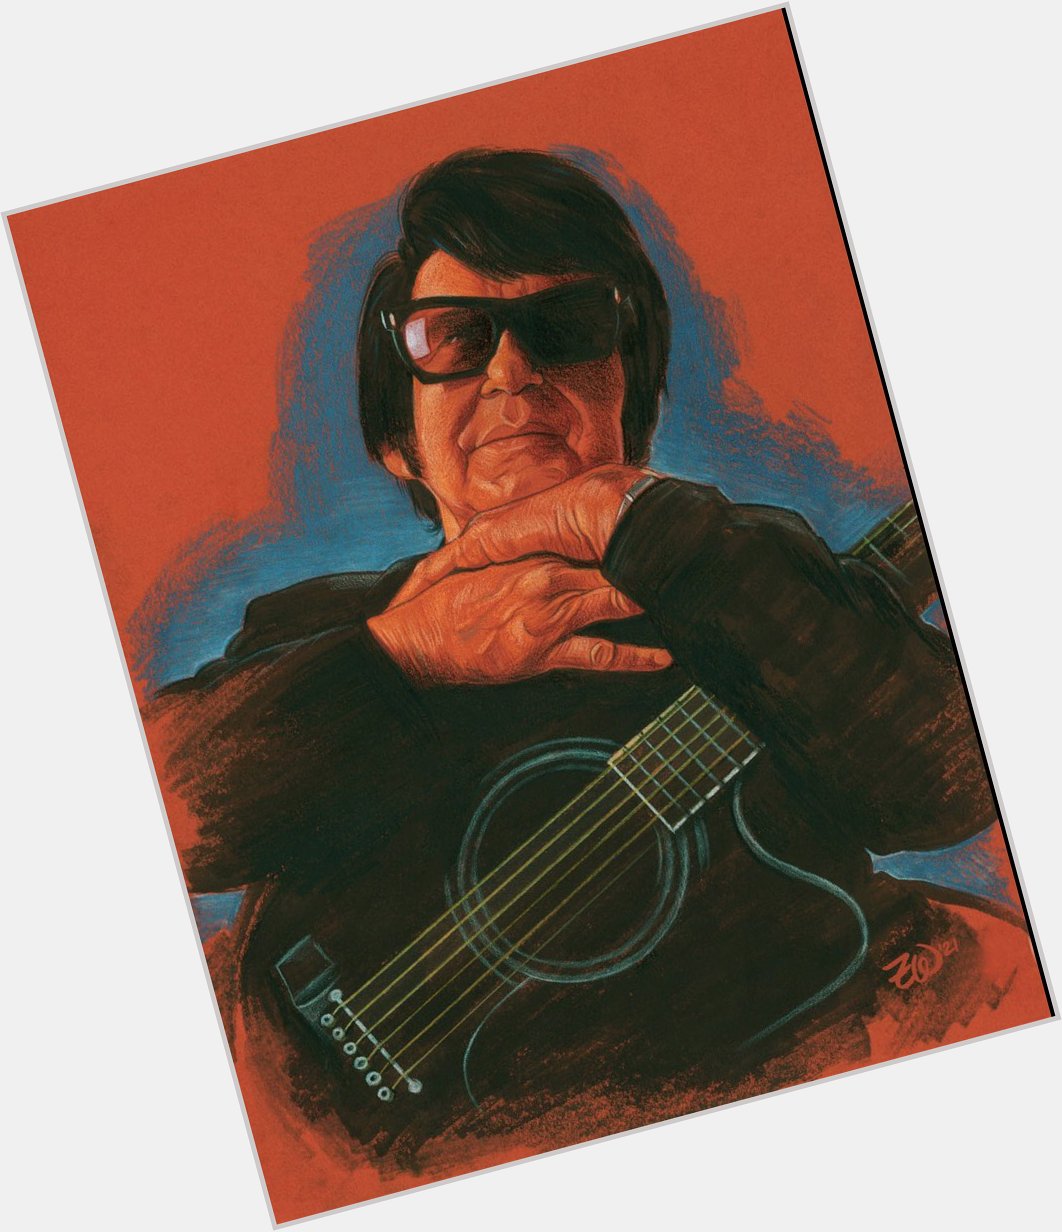 Happy Birthday to \"The Caruso of Rock\", the inimitable Roy Orbison who would\ve turned 85 today. 